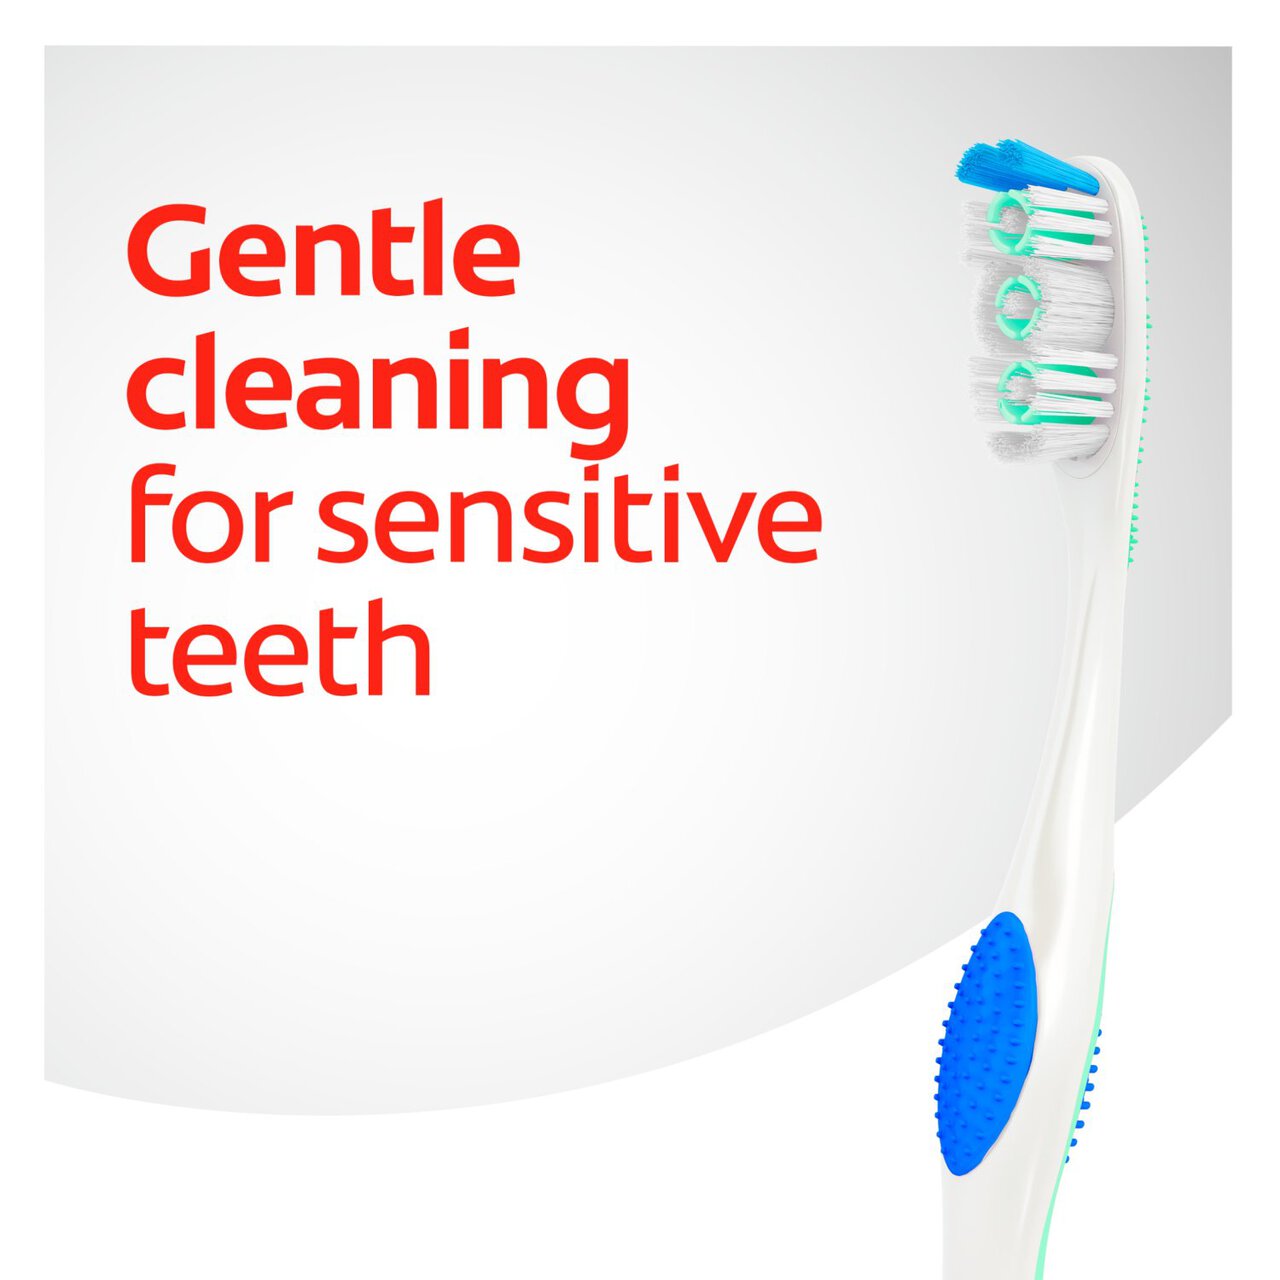 Colgate 360 Sensitive PRO-Relief Extra Soft Toothbrush